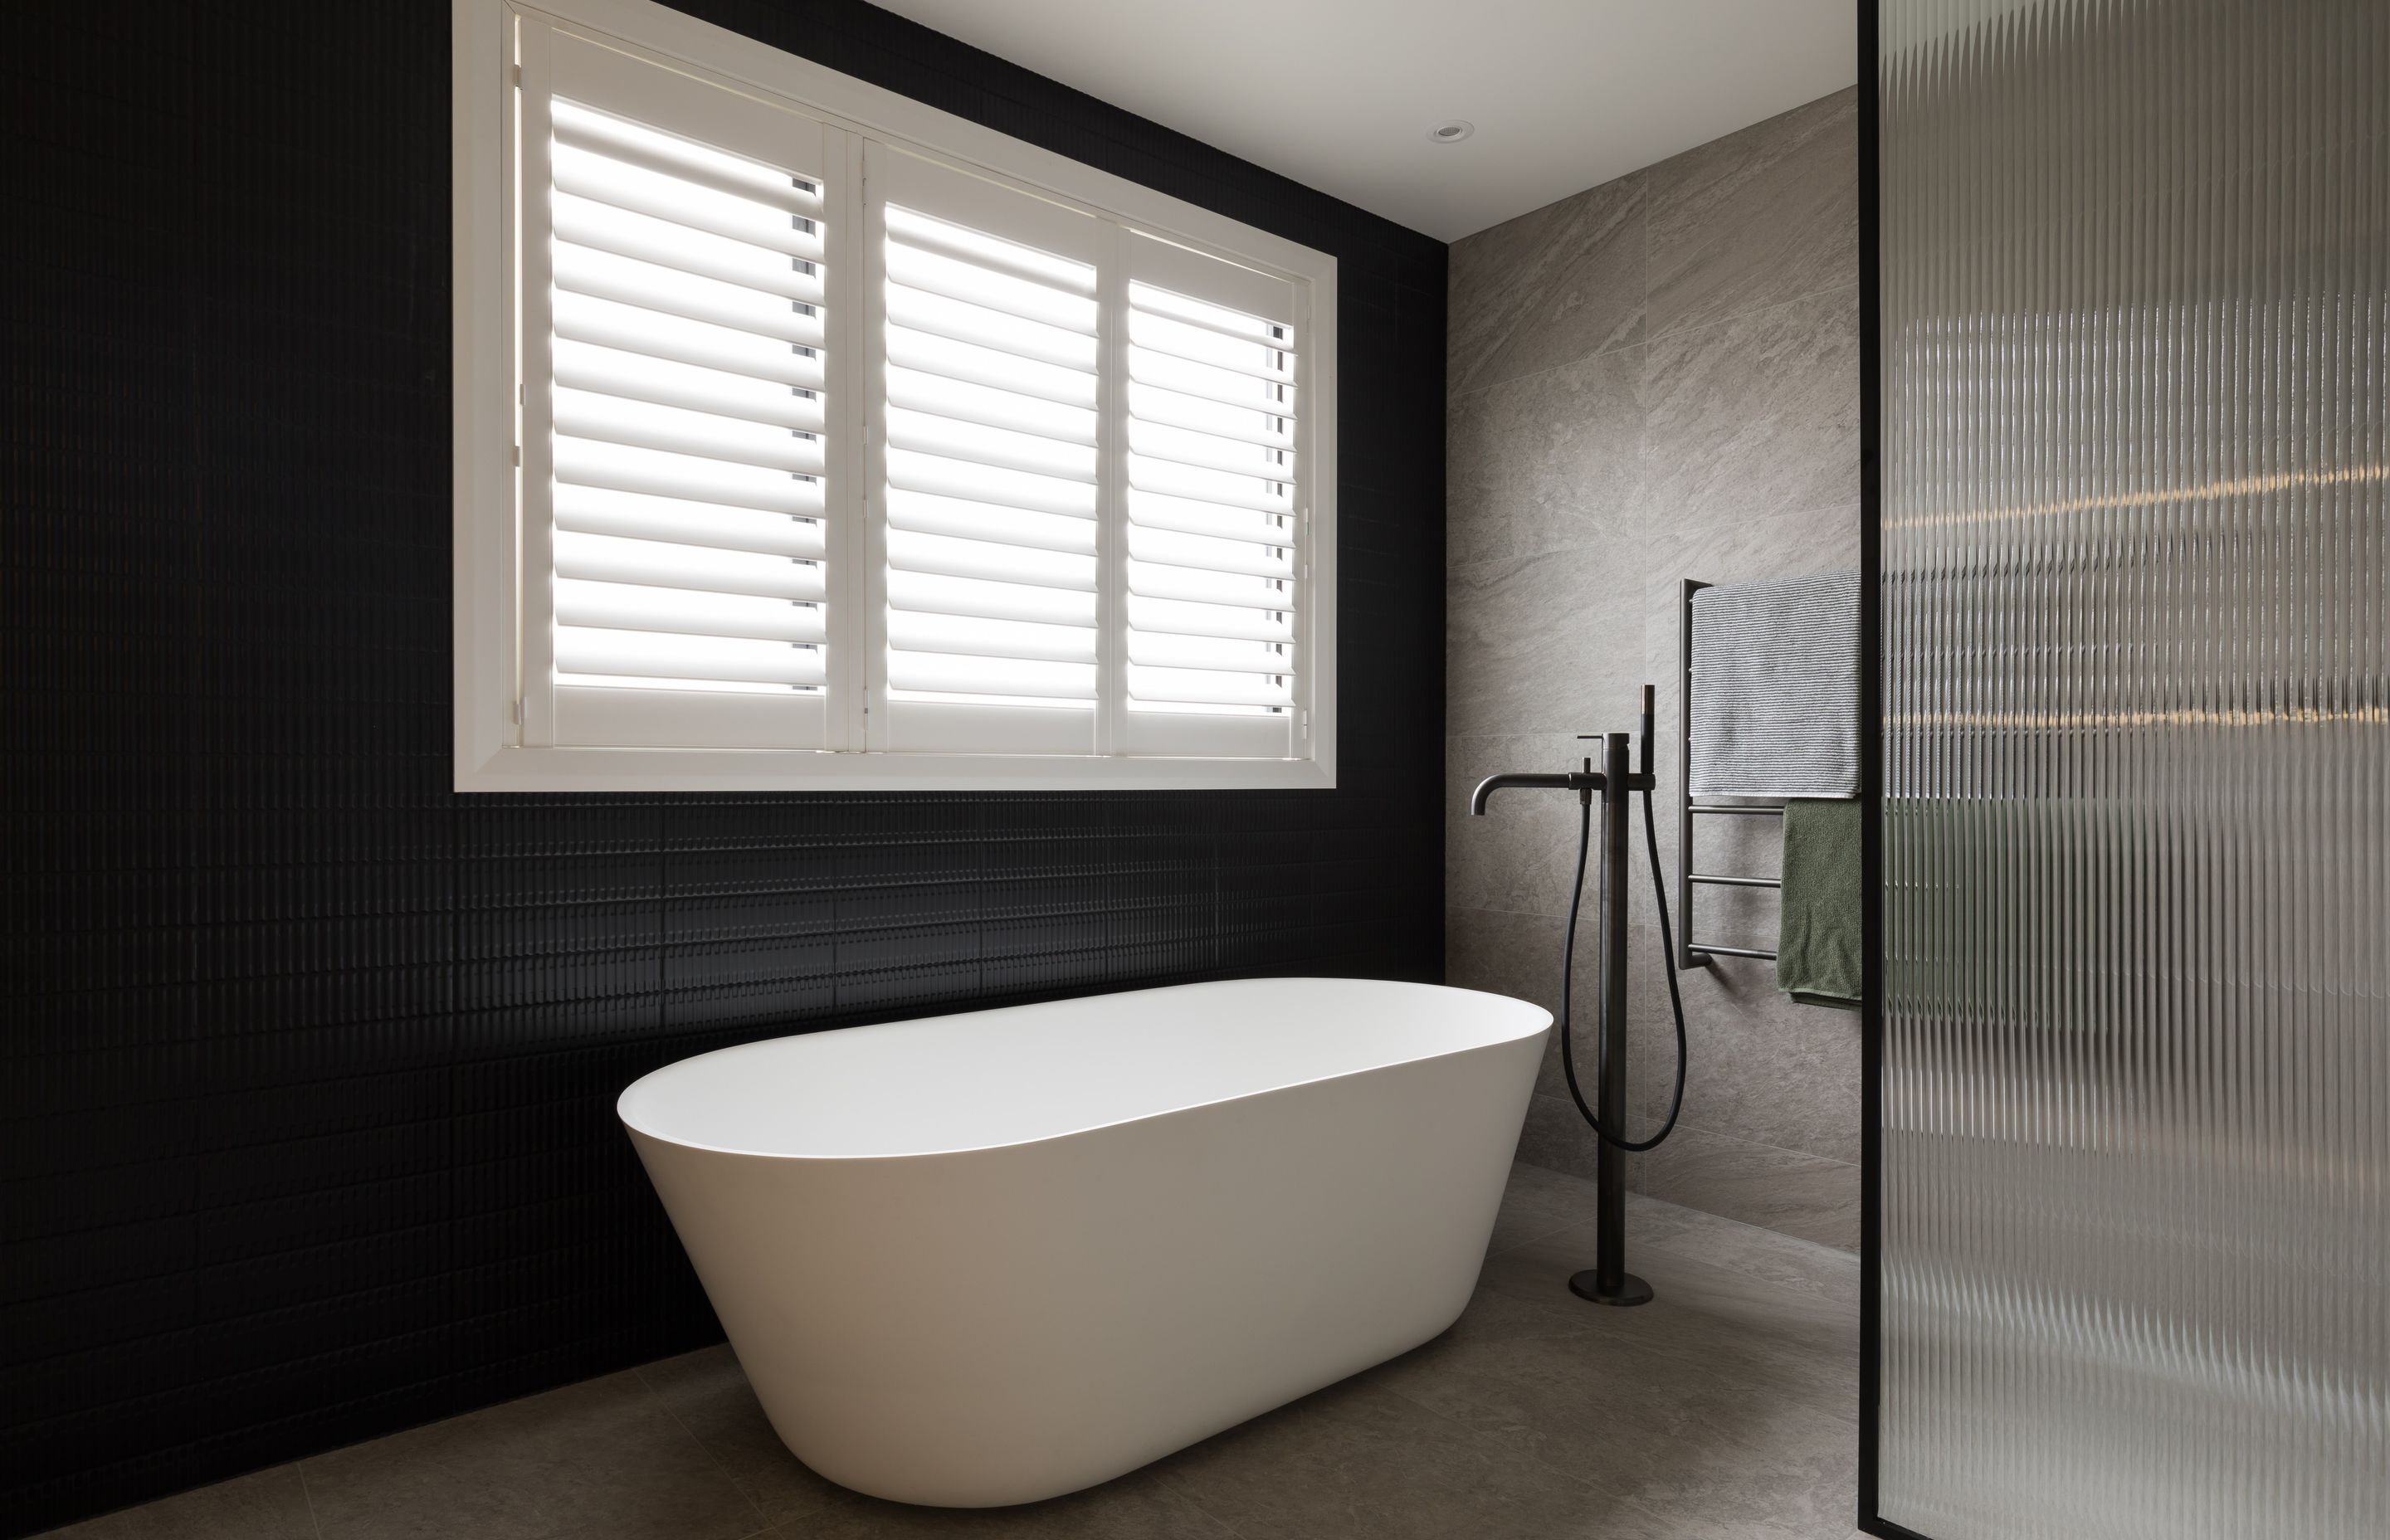 This bathroom by NM Design showcases reeded glass on the shower screen, which provides a good level of privacy without being a completely opaque material.